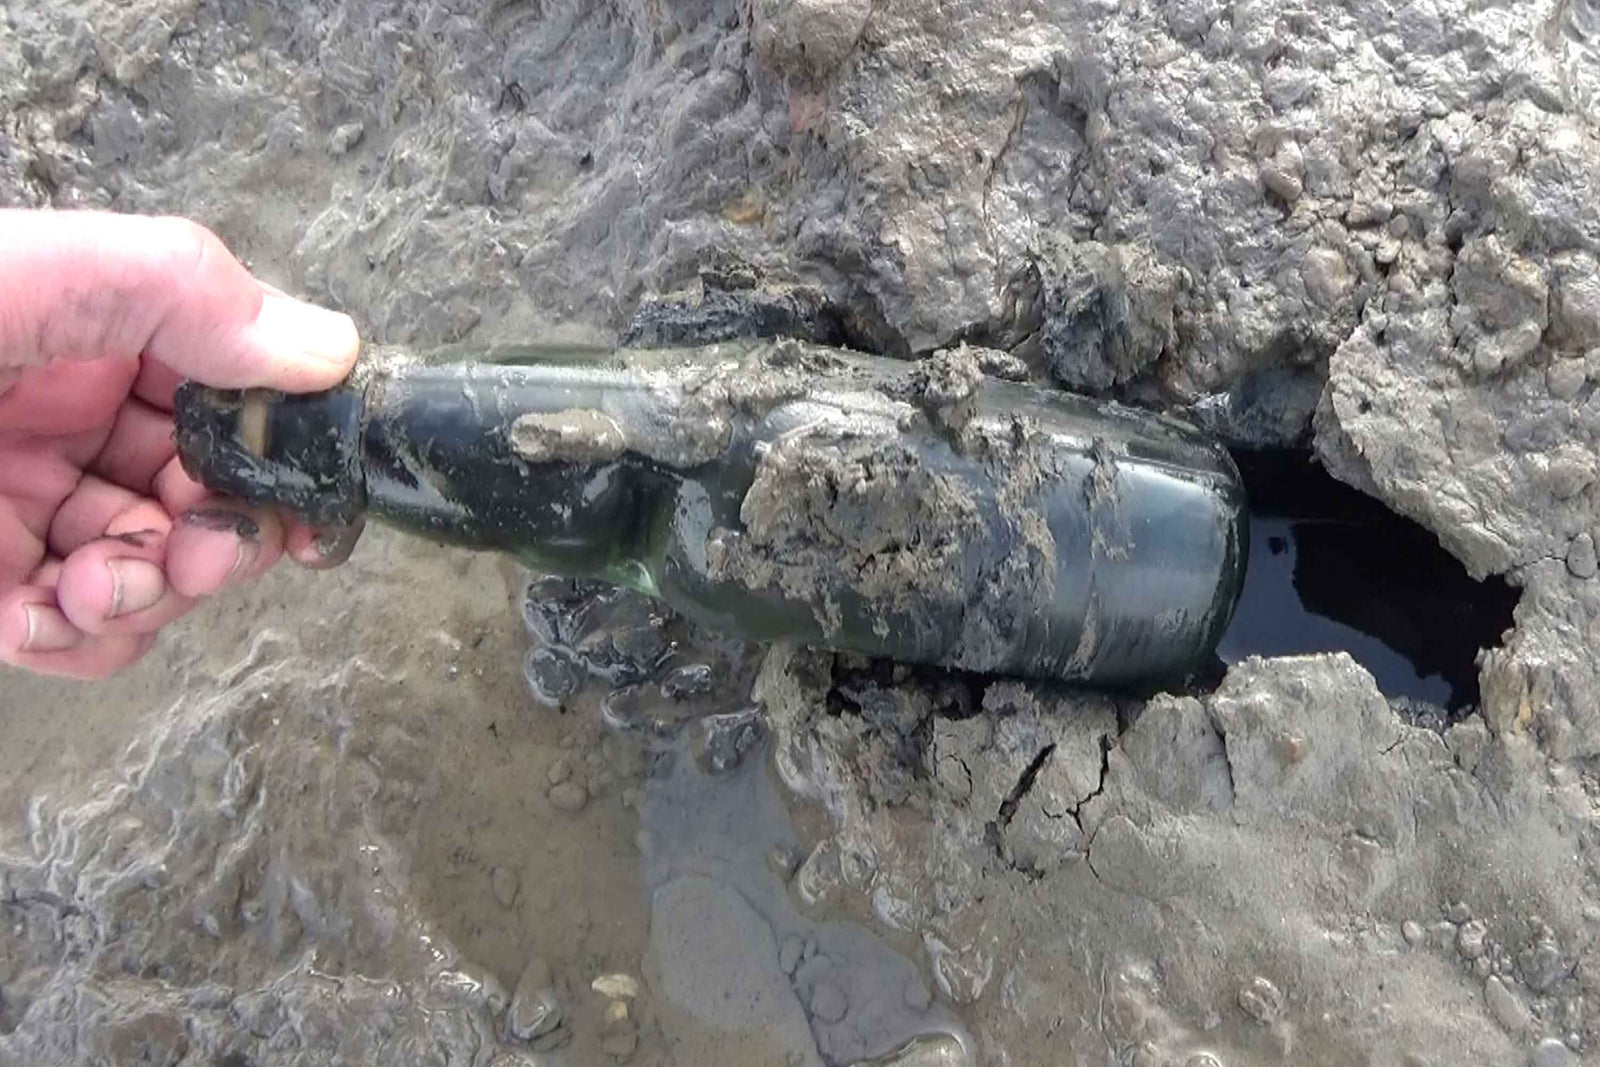 Close up of a hand pulling a bottle out of mud